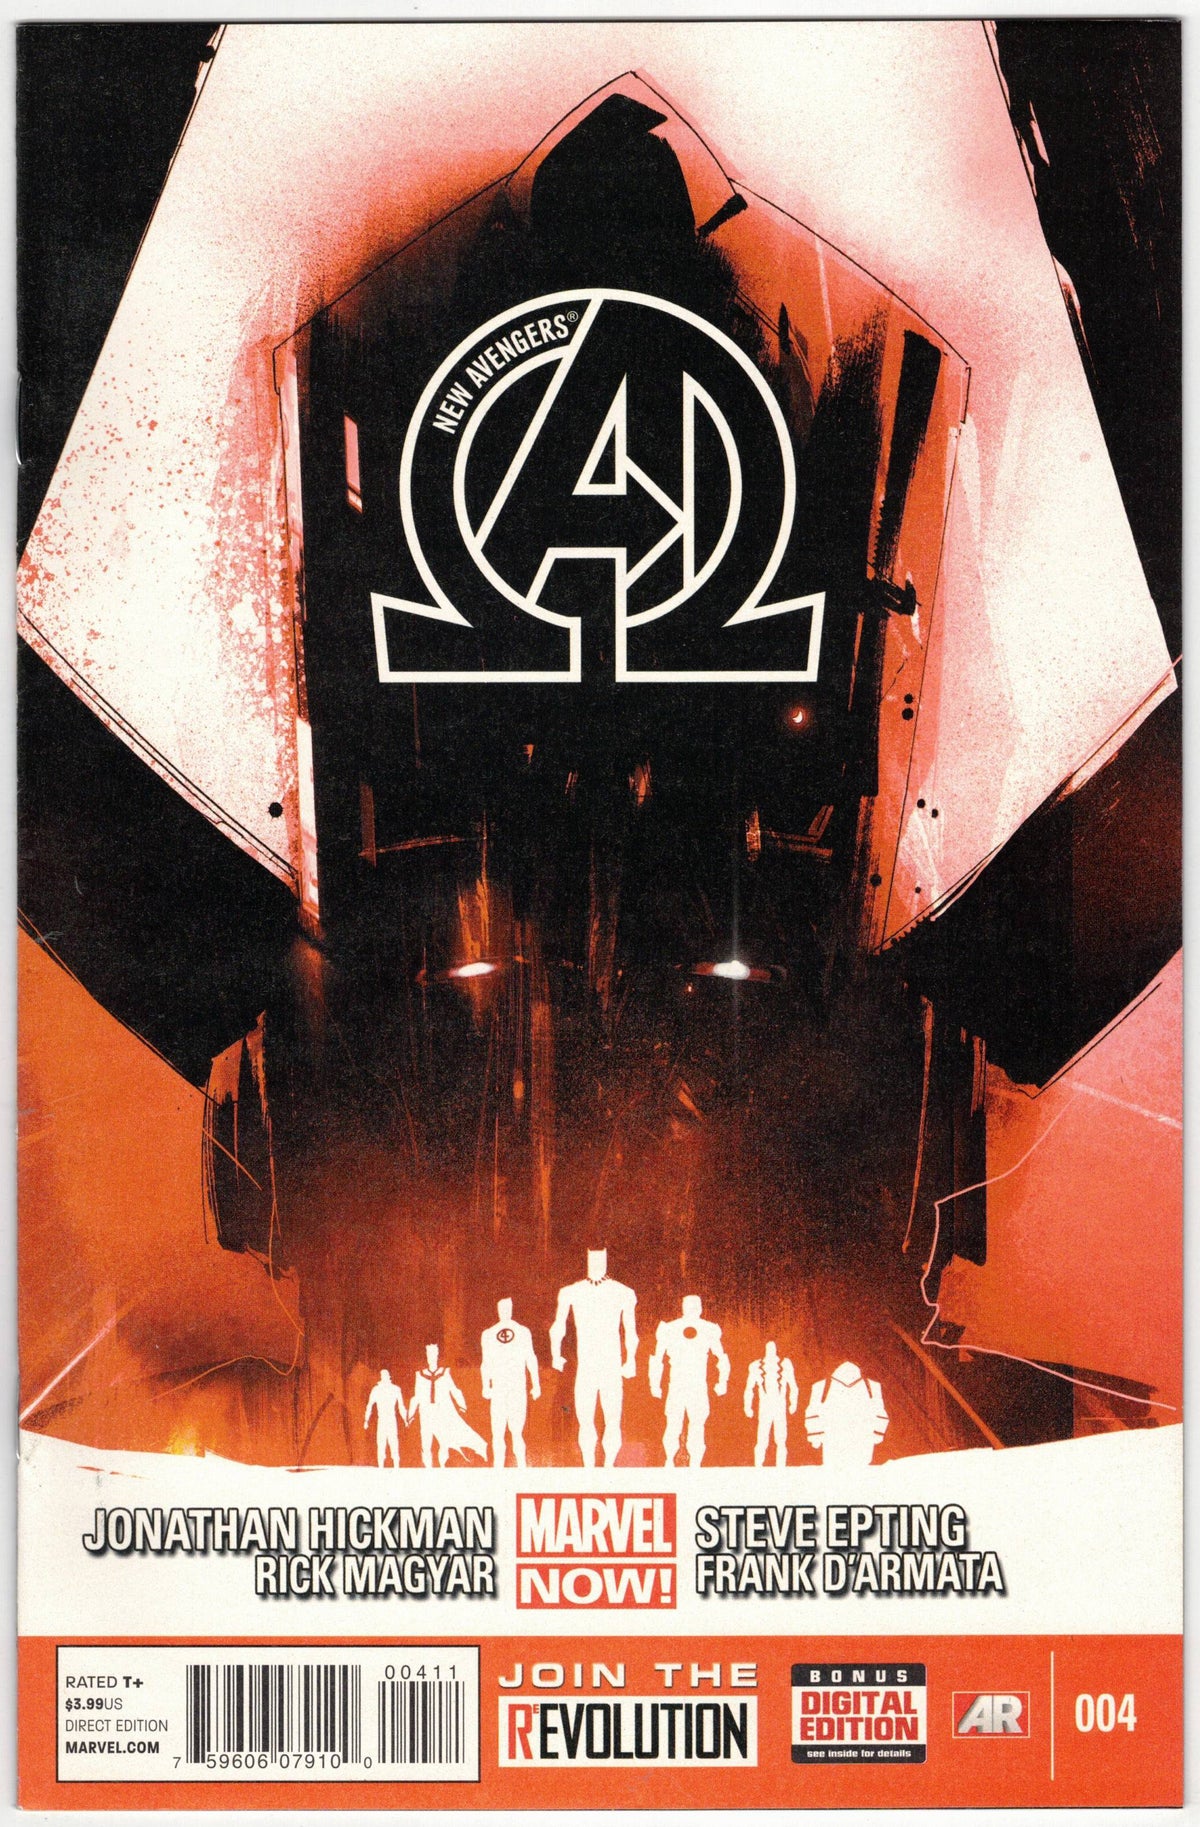 Photo of New Avengers, Vol. 3 (2013) Issue 4A - Near Mint Comic sold by Stronghold Collectibles